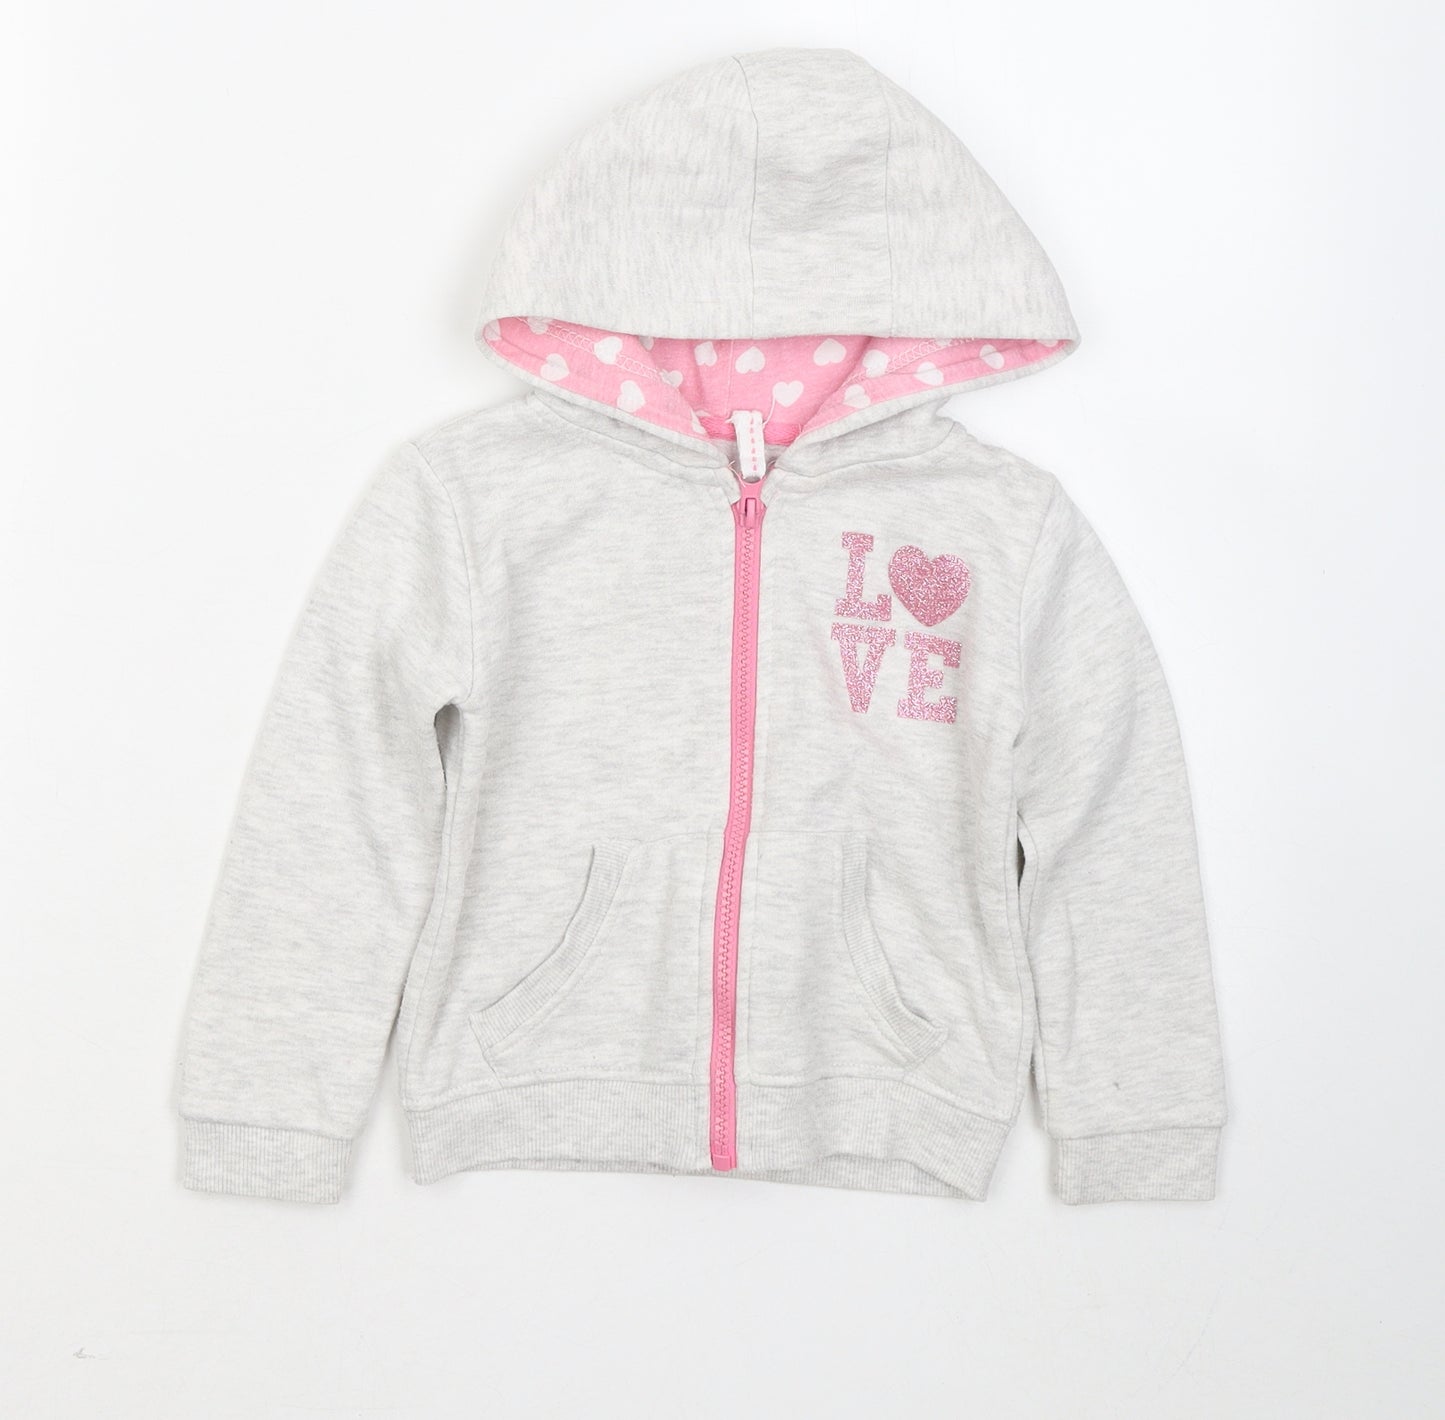 Young Dimension Girls Grey Jacket Size 3-4 Years - Love